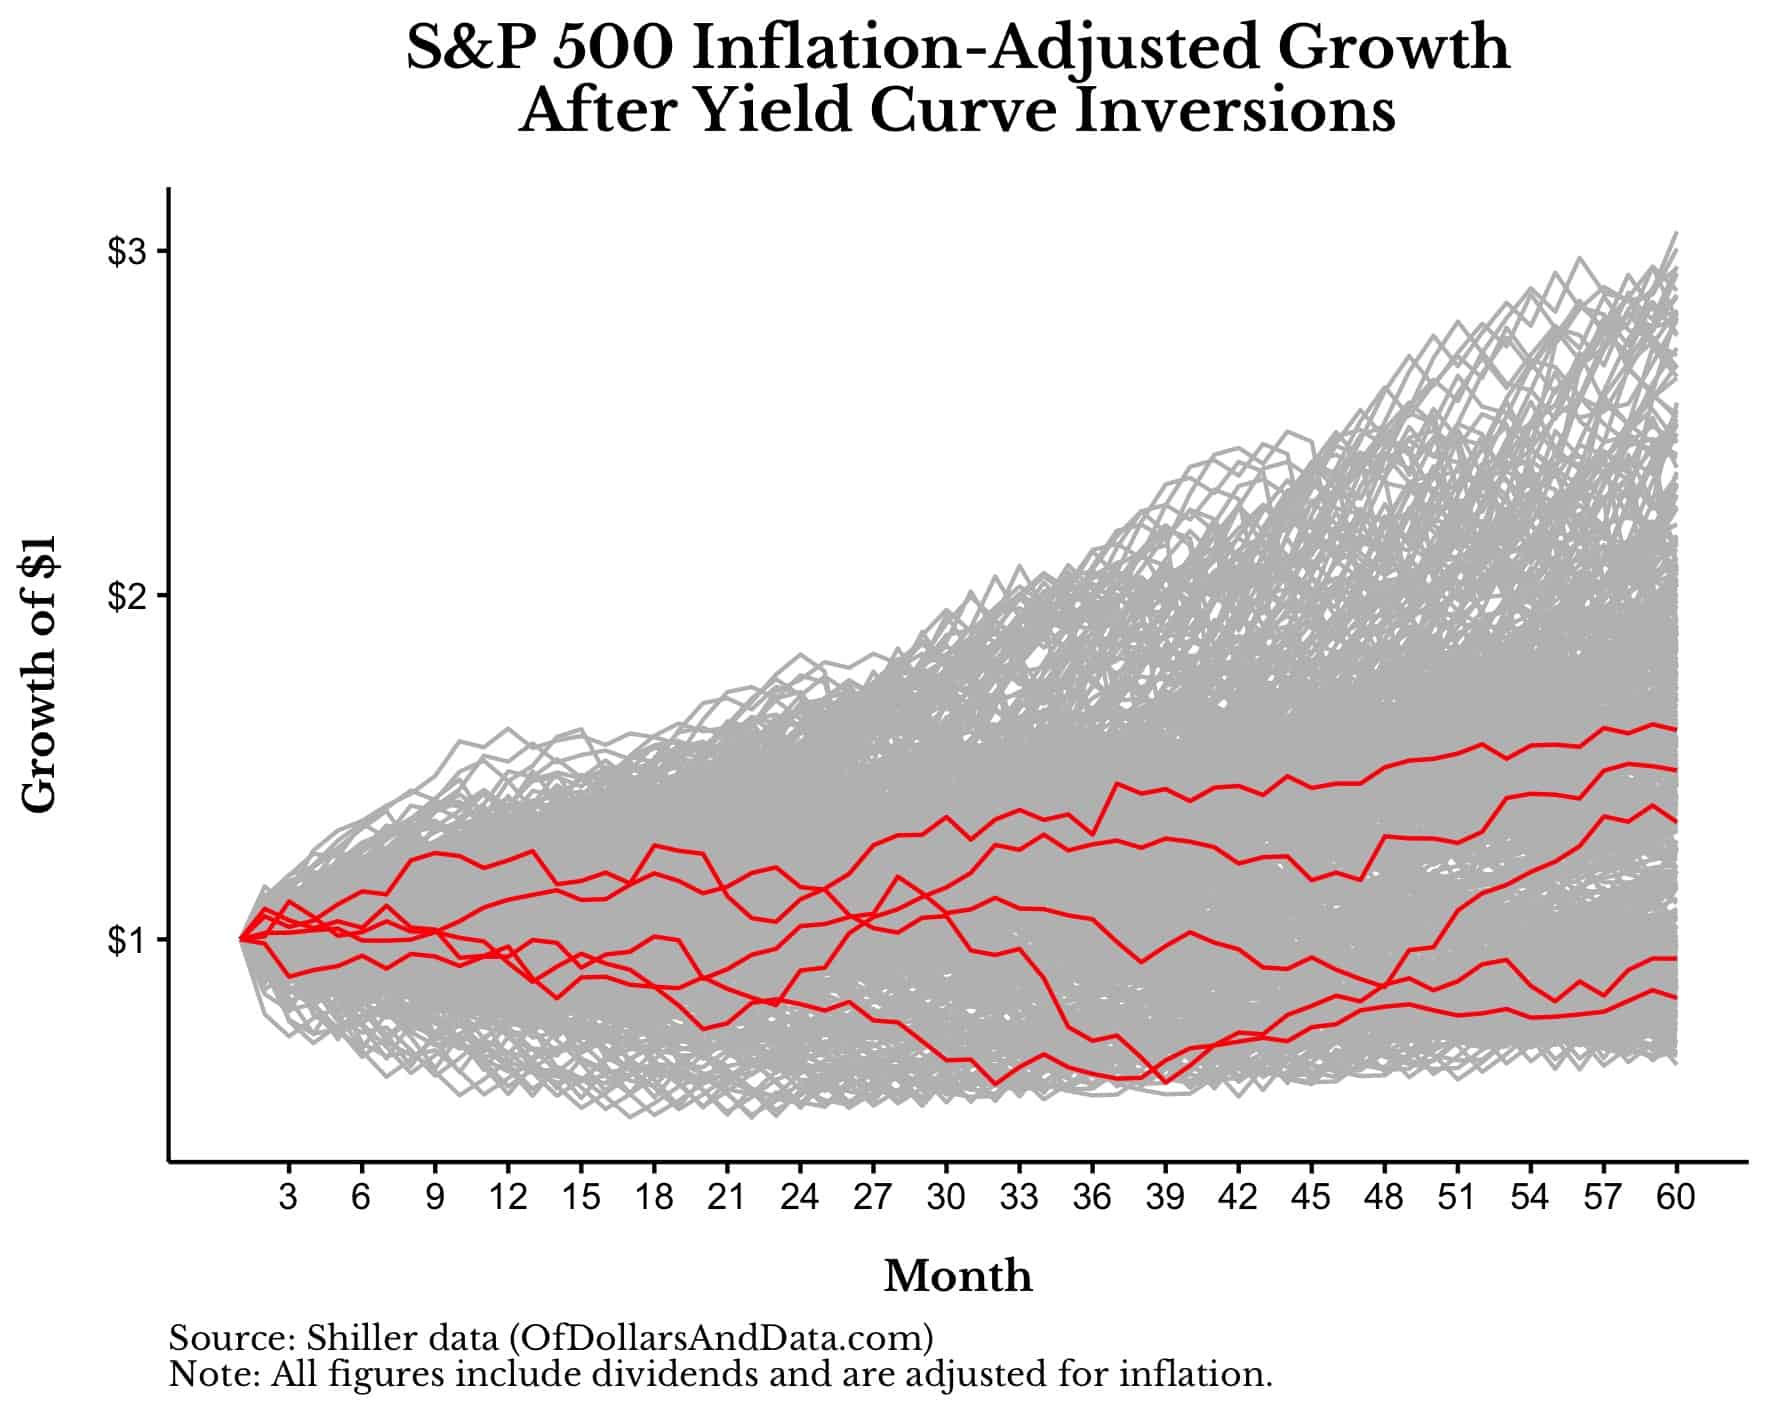 S&P 500 inflation-adjusted 60-month growth after yield curve inversions